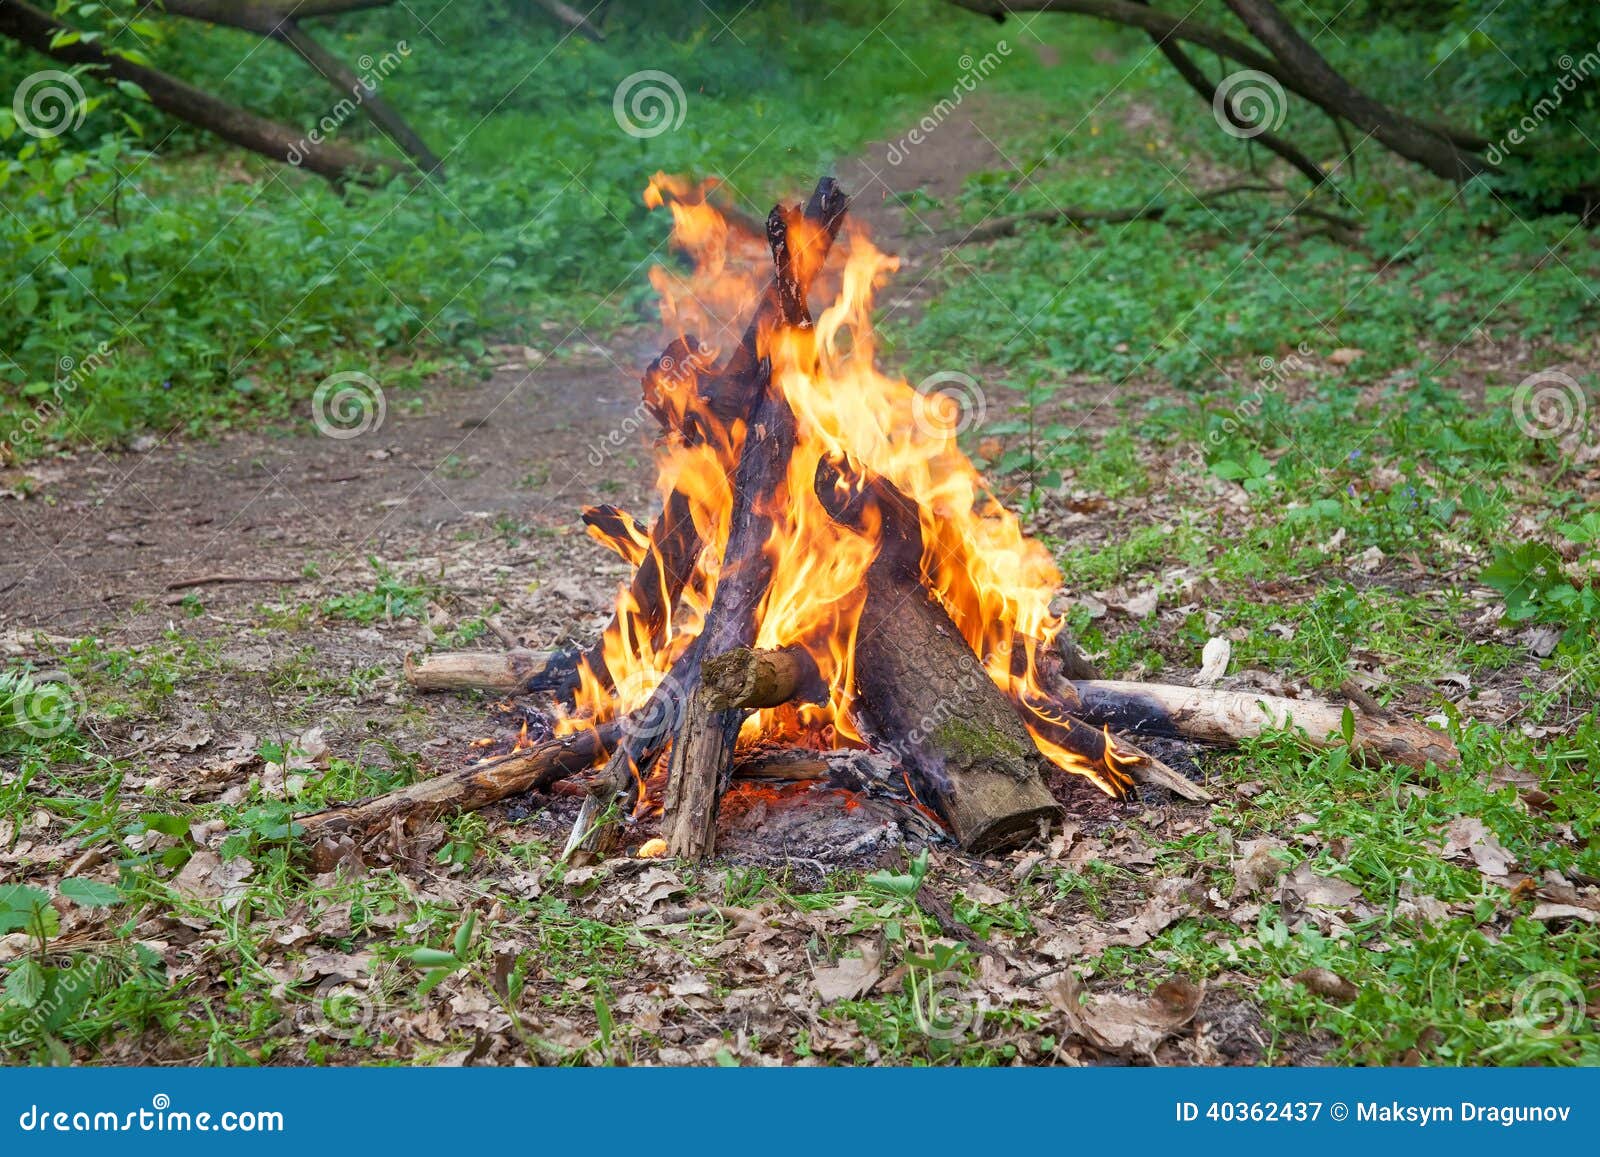 Camp fire stock image. Image of weekend, park, adventure - 40362437